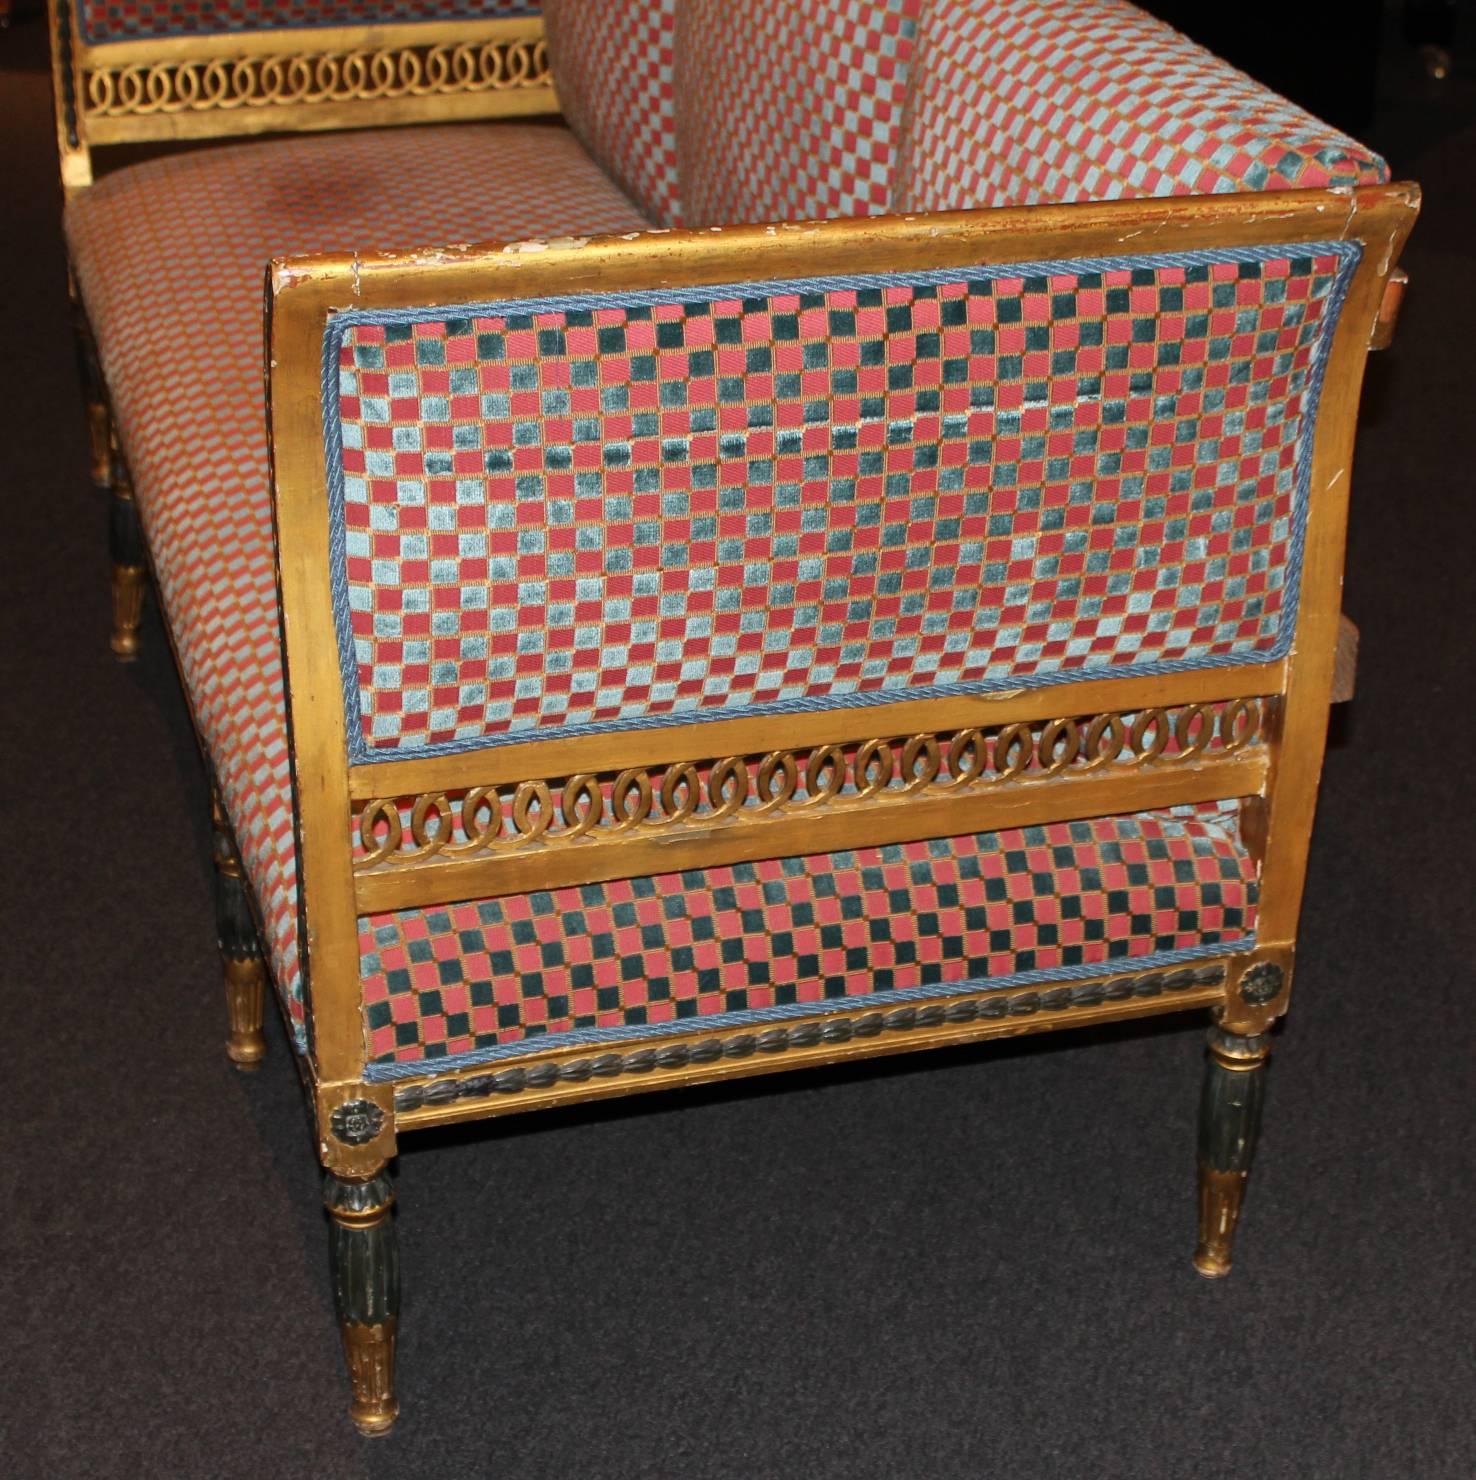 19th Century Gustavian Period Neoclassical Giltwood and Polychrome Sofa, circa 1800, Sweden